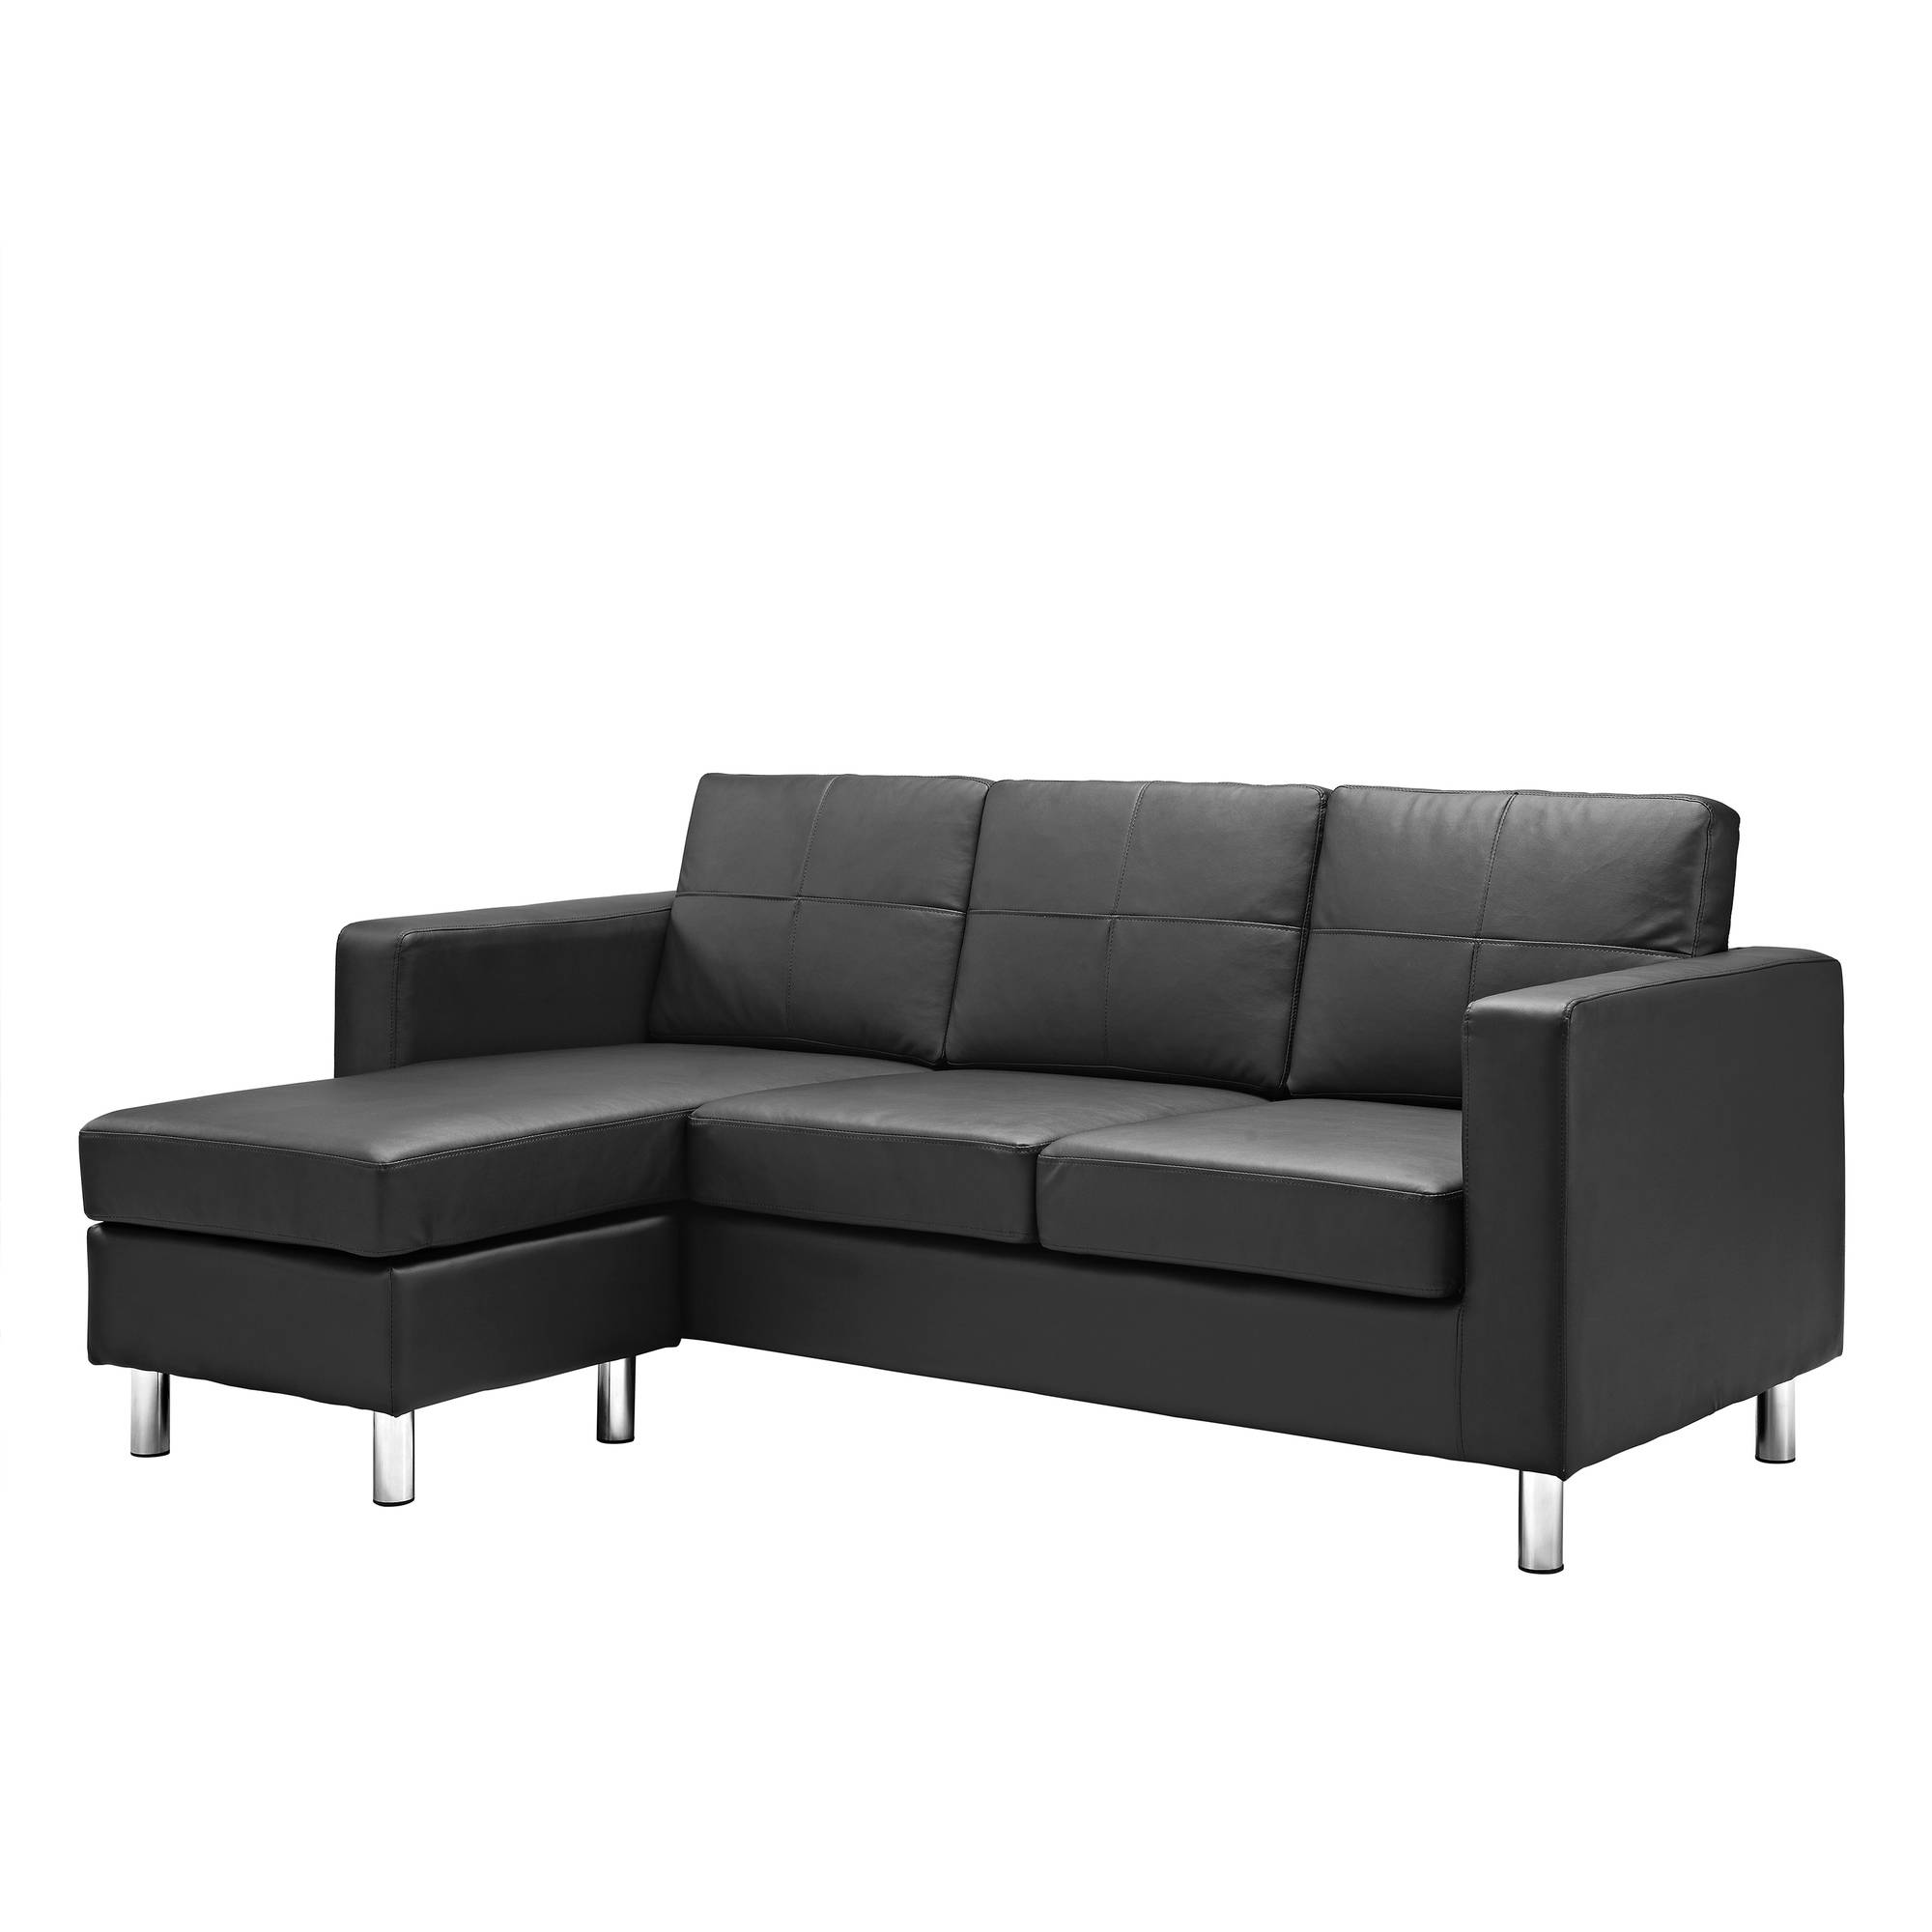 DHP Small Spaces Configurable Sectional Sofa, Multiple Colors - Black - image 3 of 6